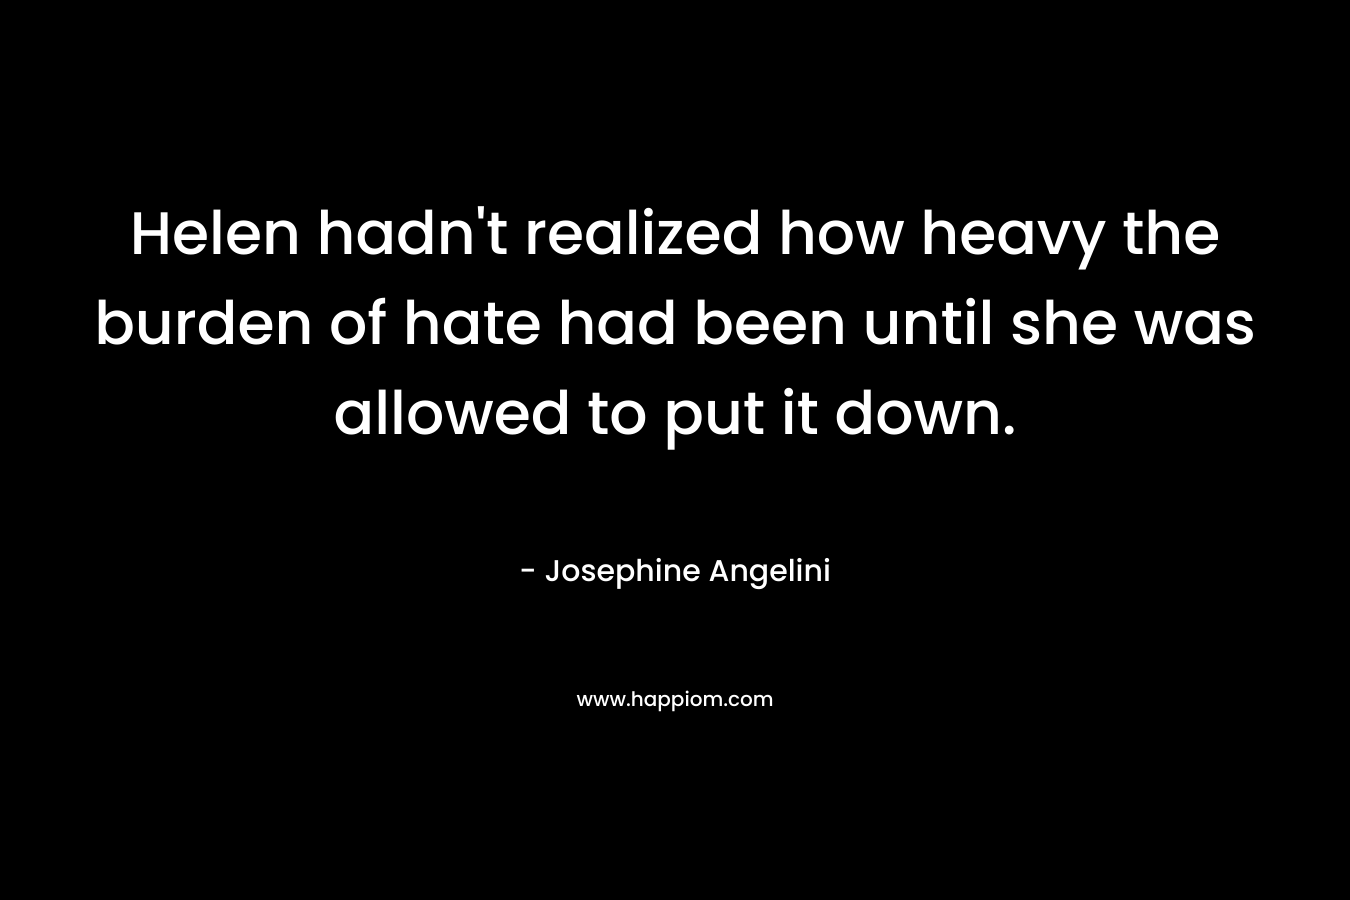 Helen hadn’t realized how heavy the burden of hate had been until she was allowed to put it down. – Josephine Angelini